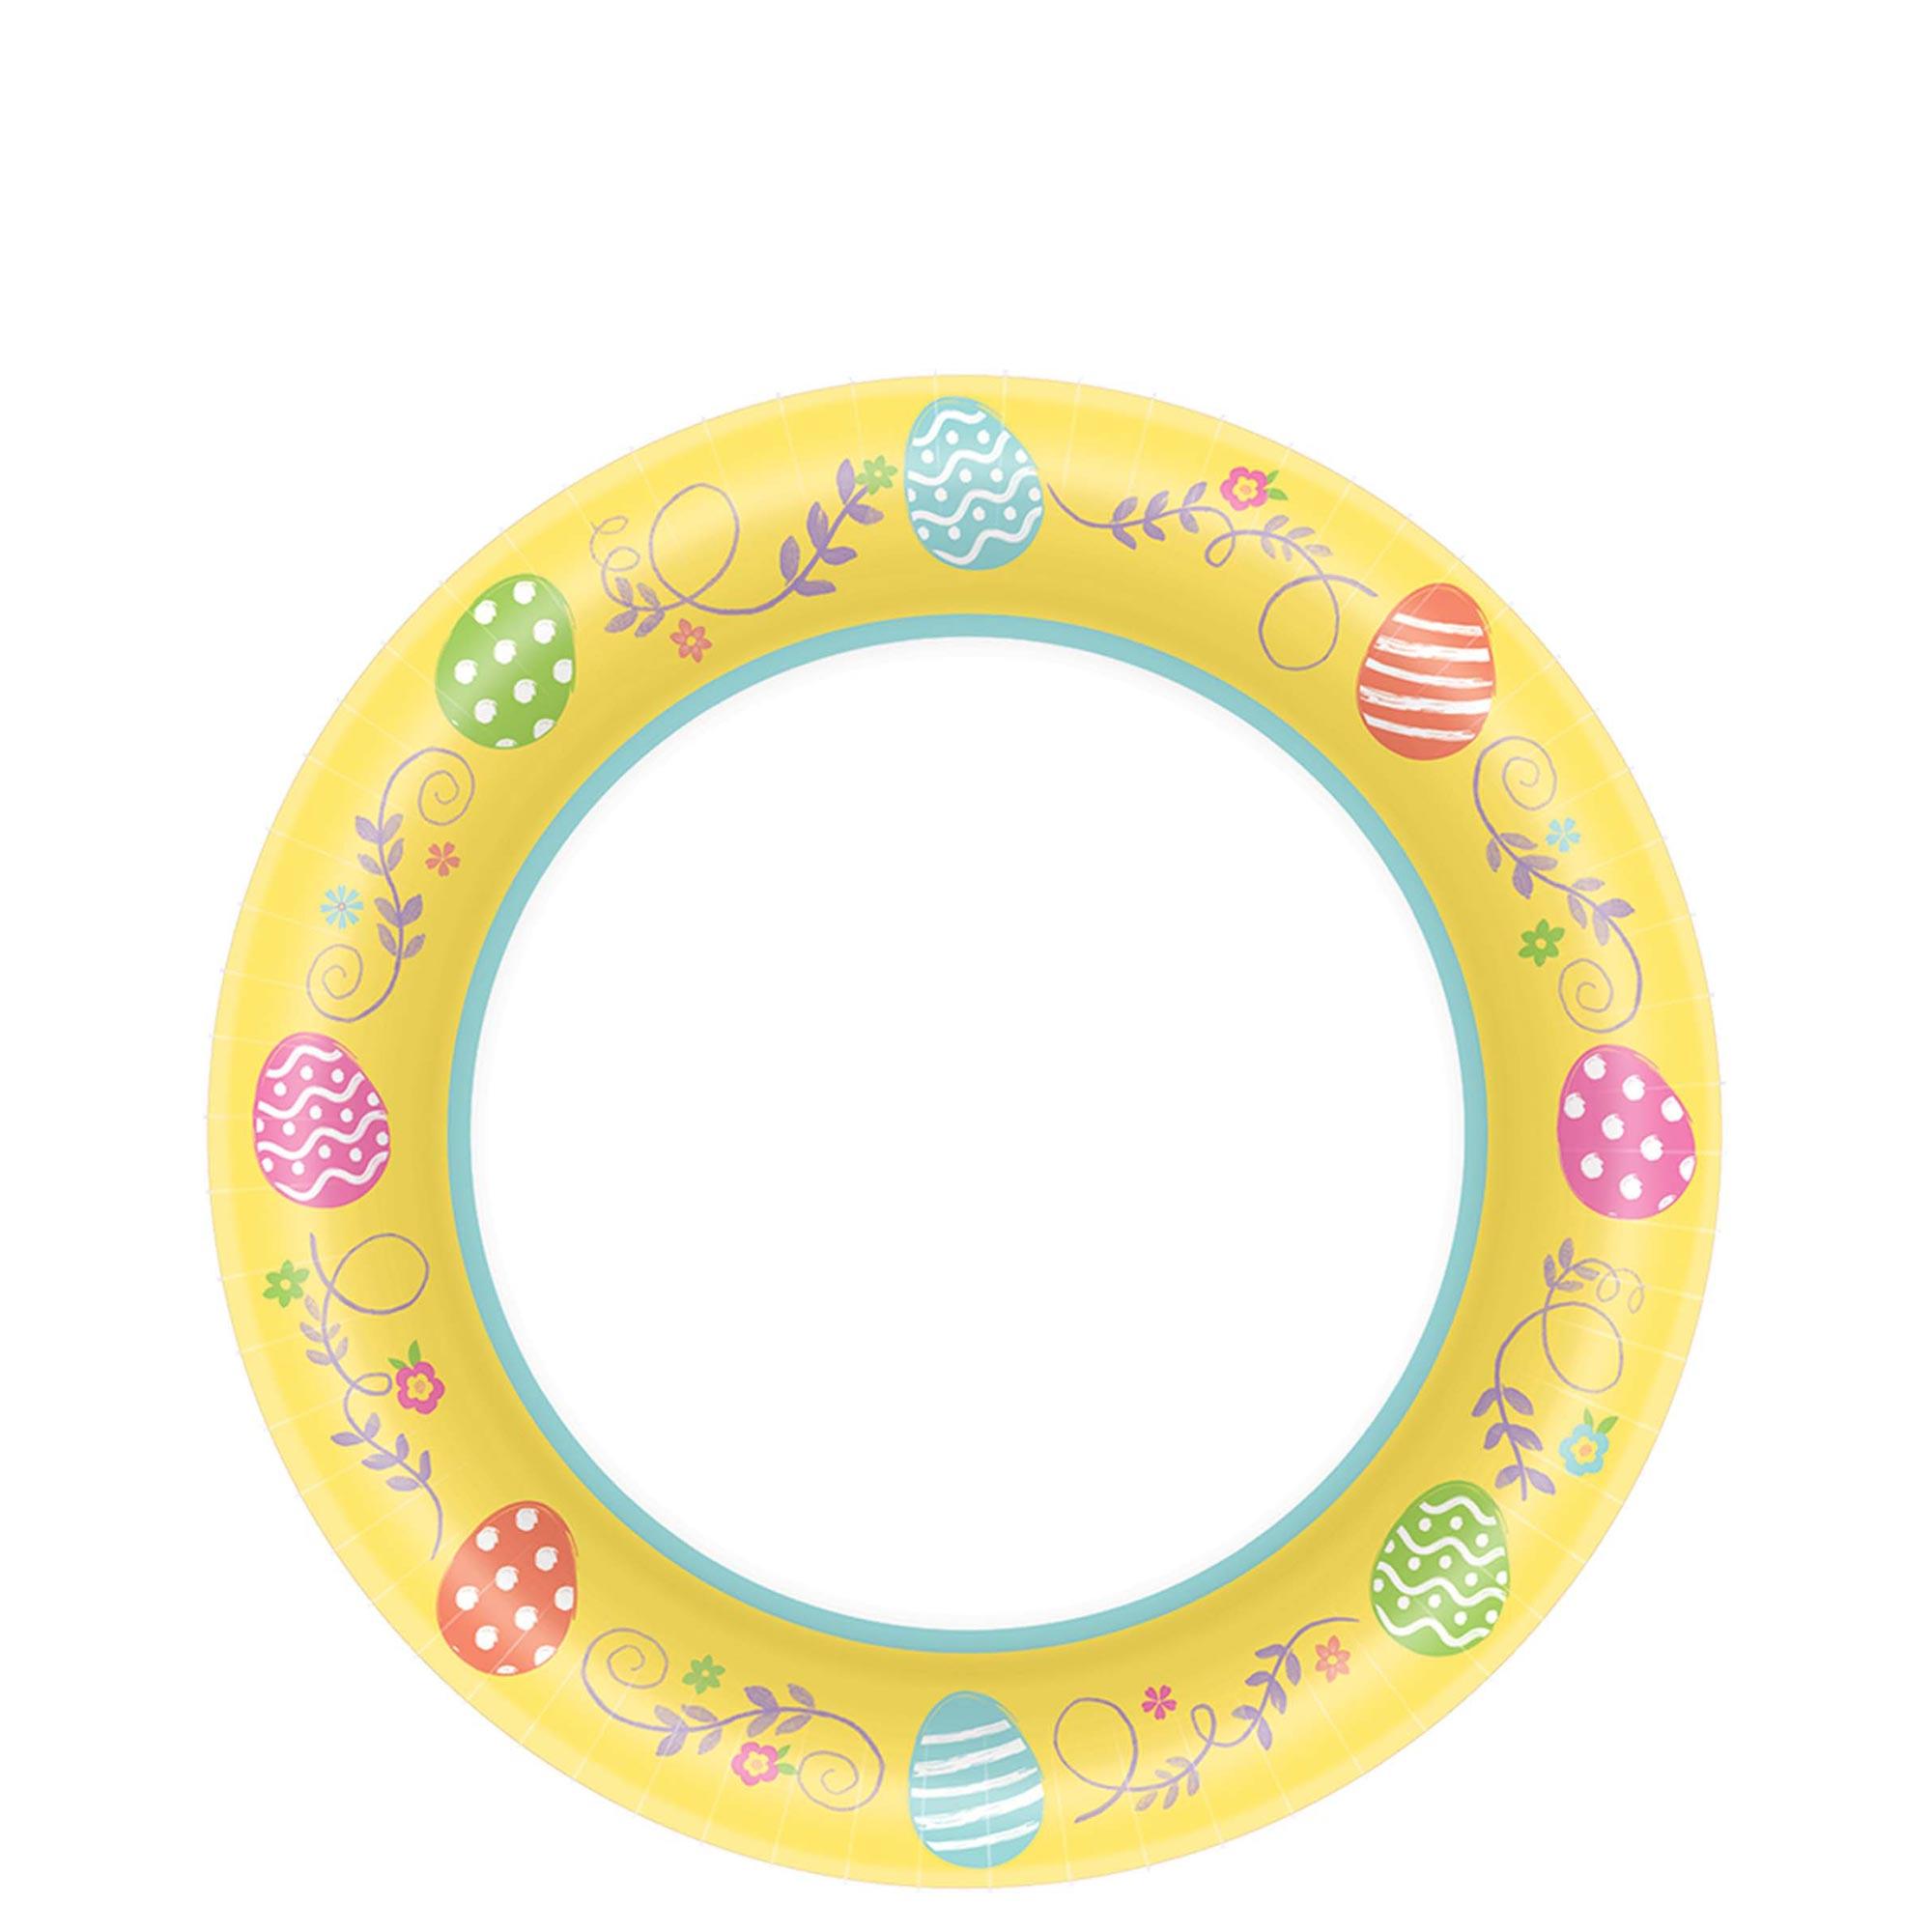 Easter Egg-Cellent Round Paper Plates 7in, 8pcs Printed Tableware - Party Centre